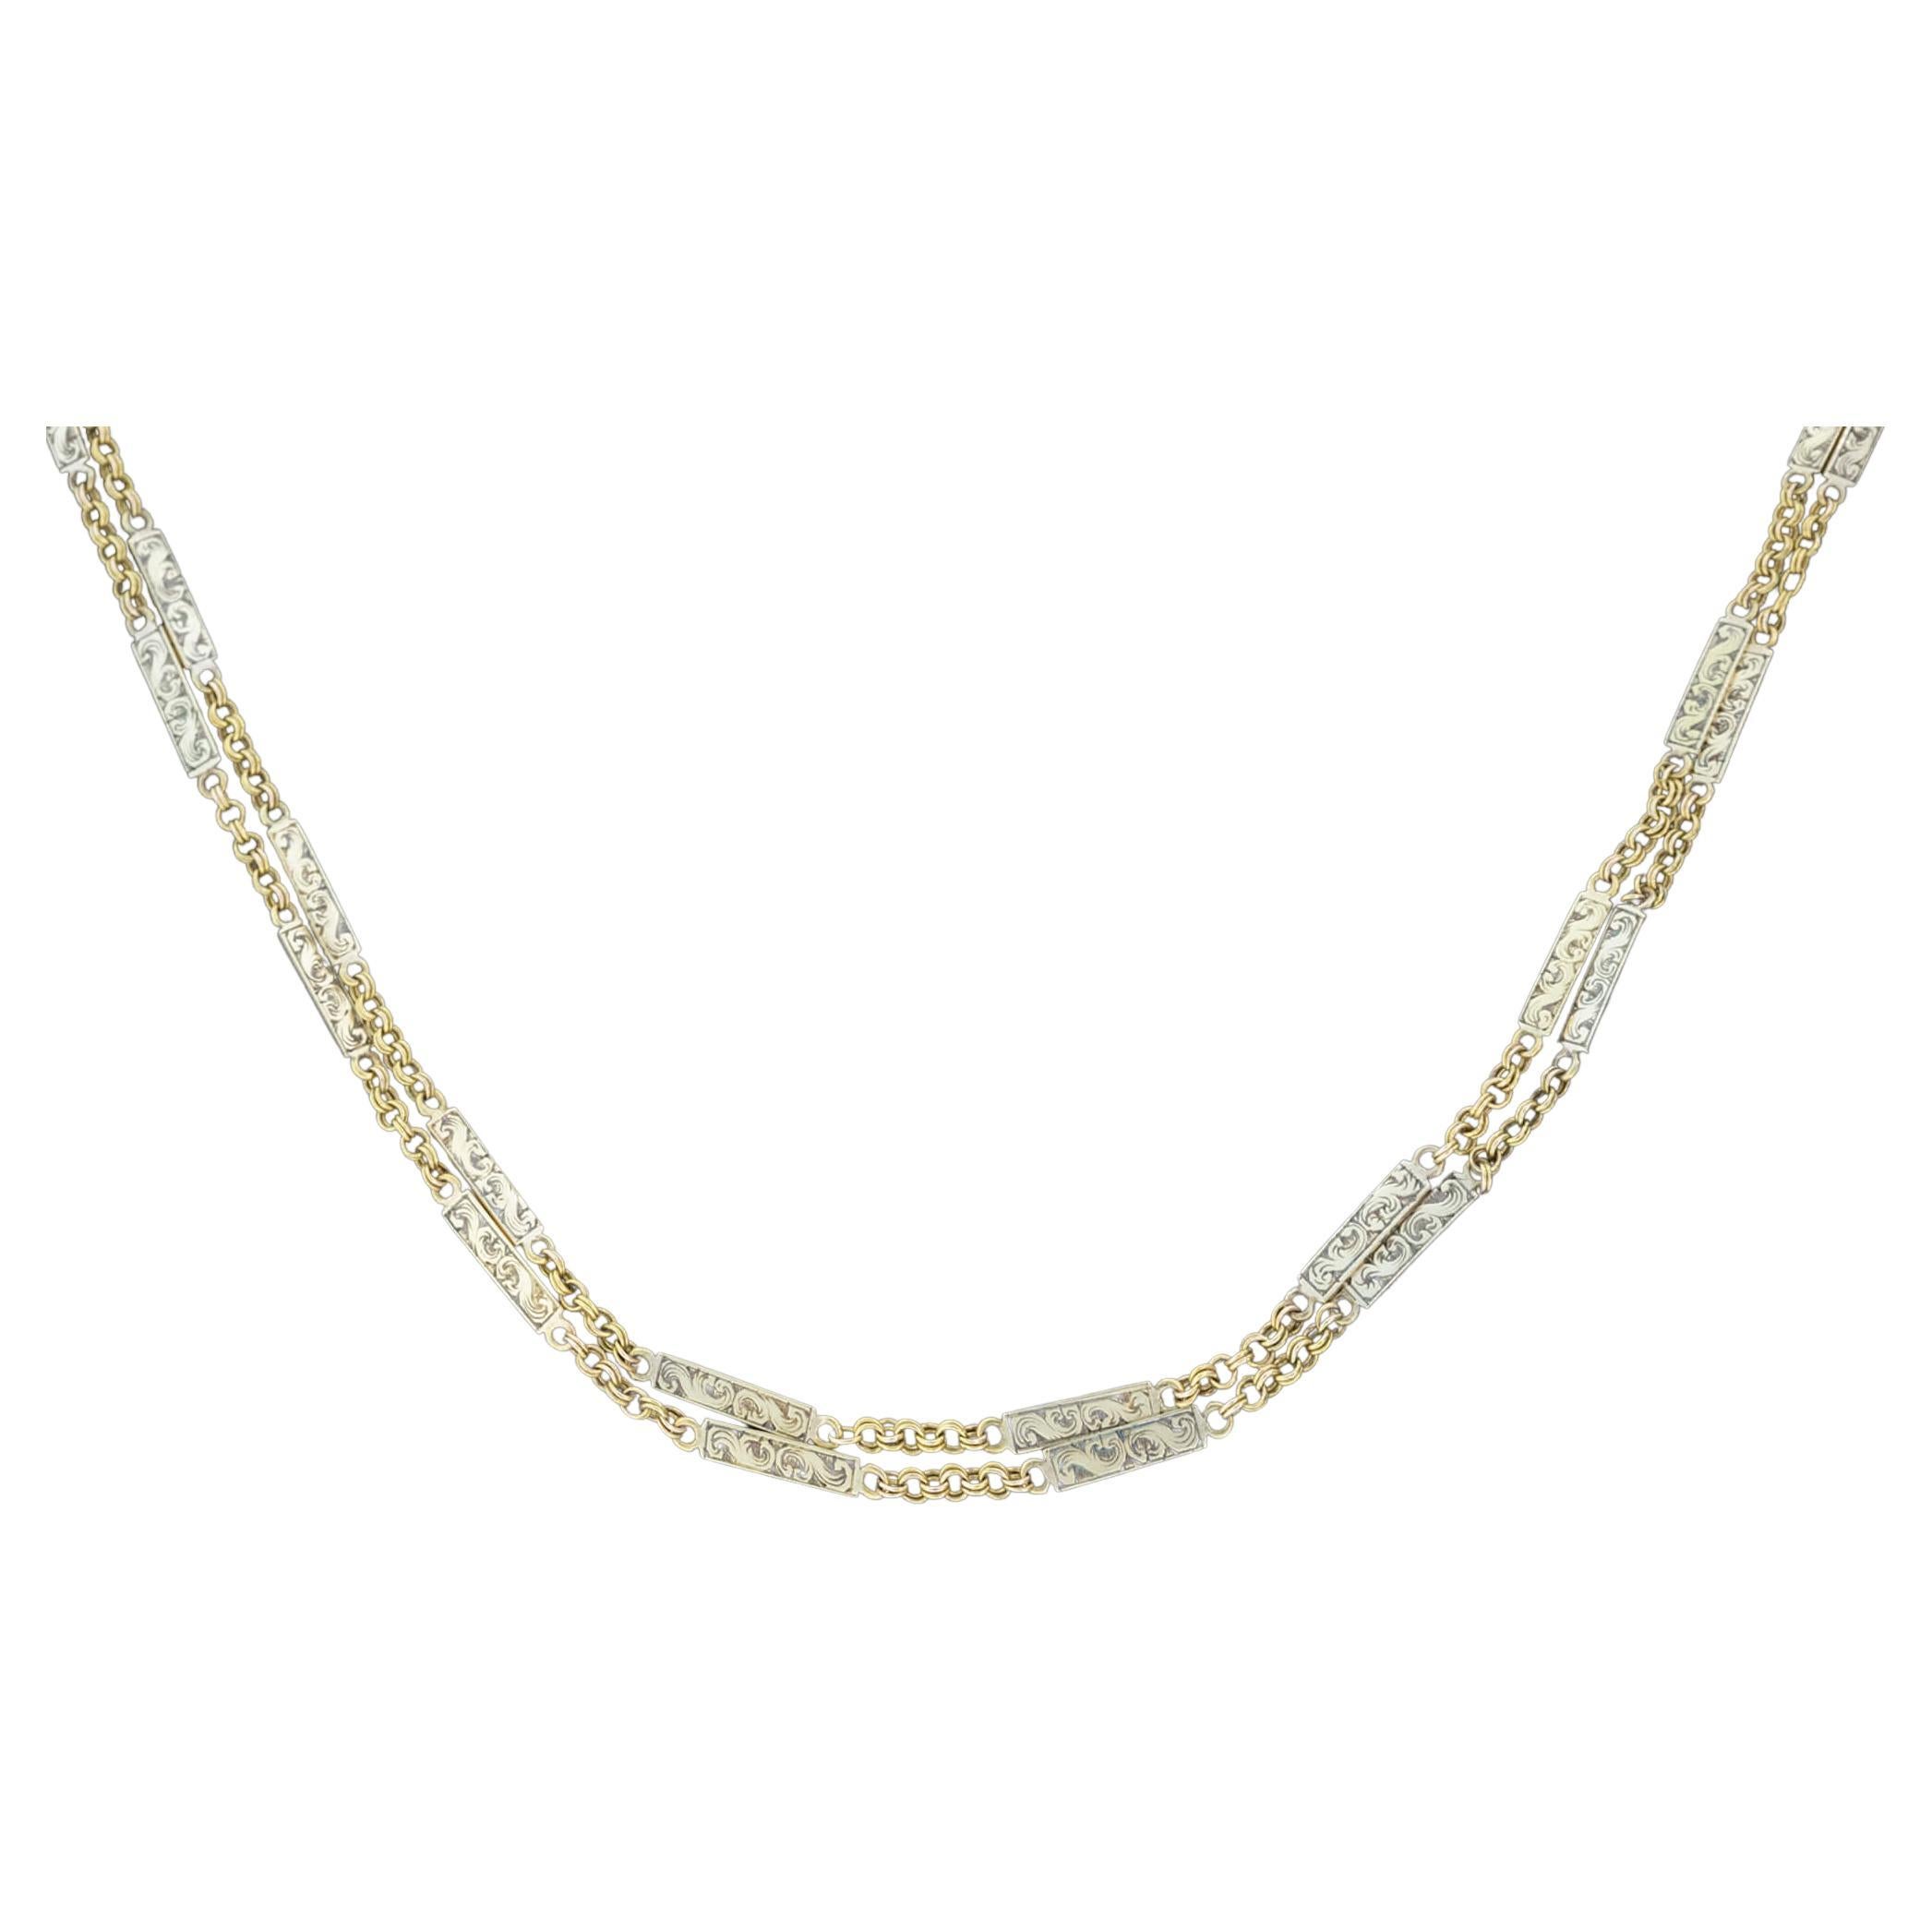 Antique Victorian Long 18k yellow Gold Guard Chain Circa 1890 For Sale